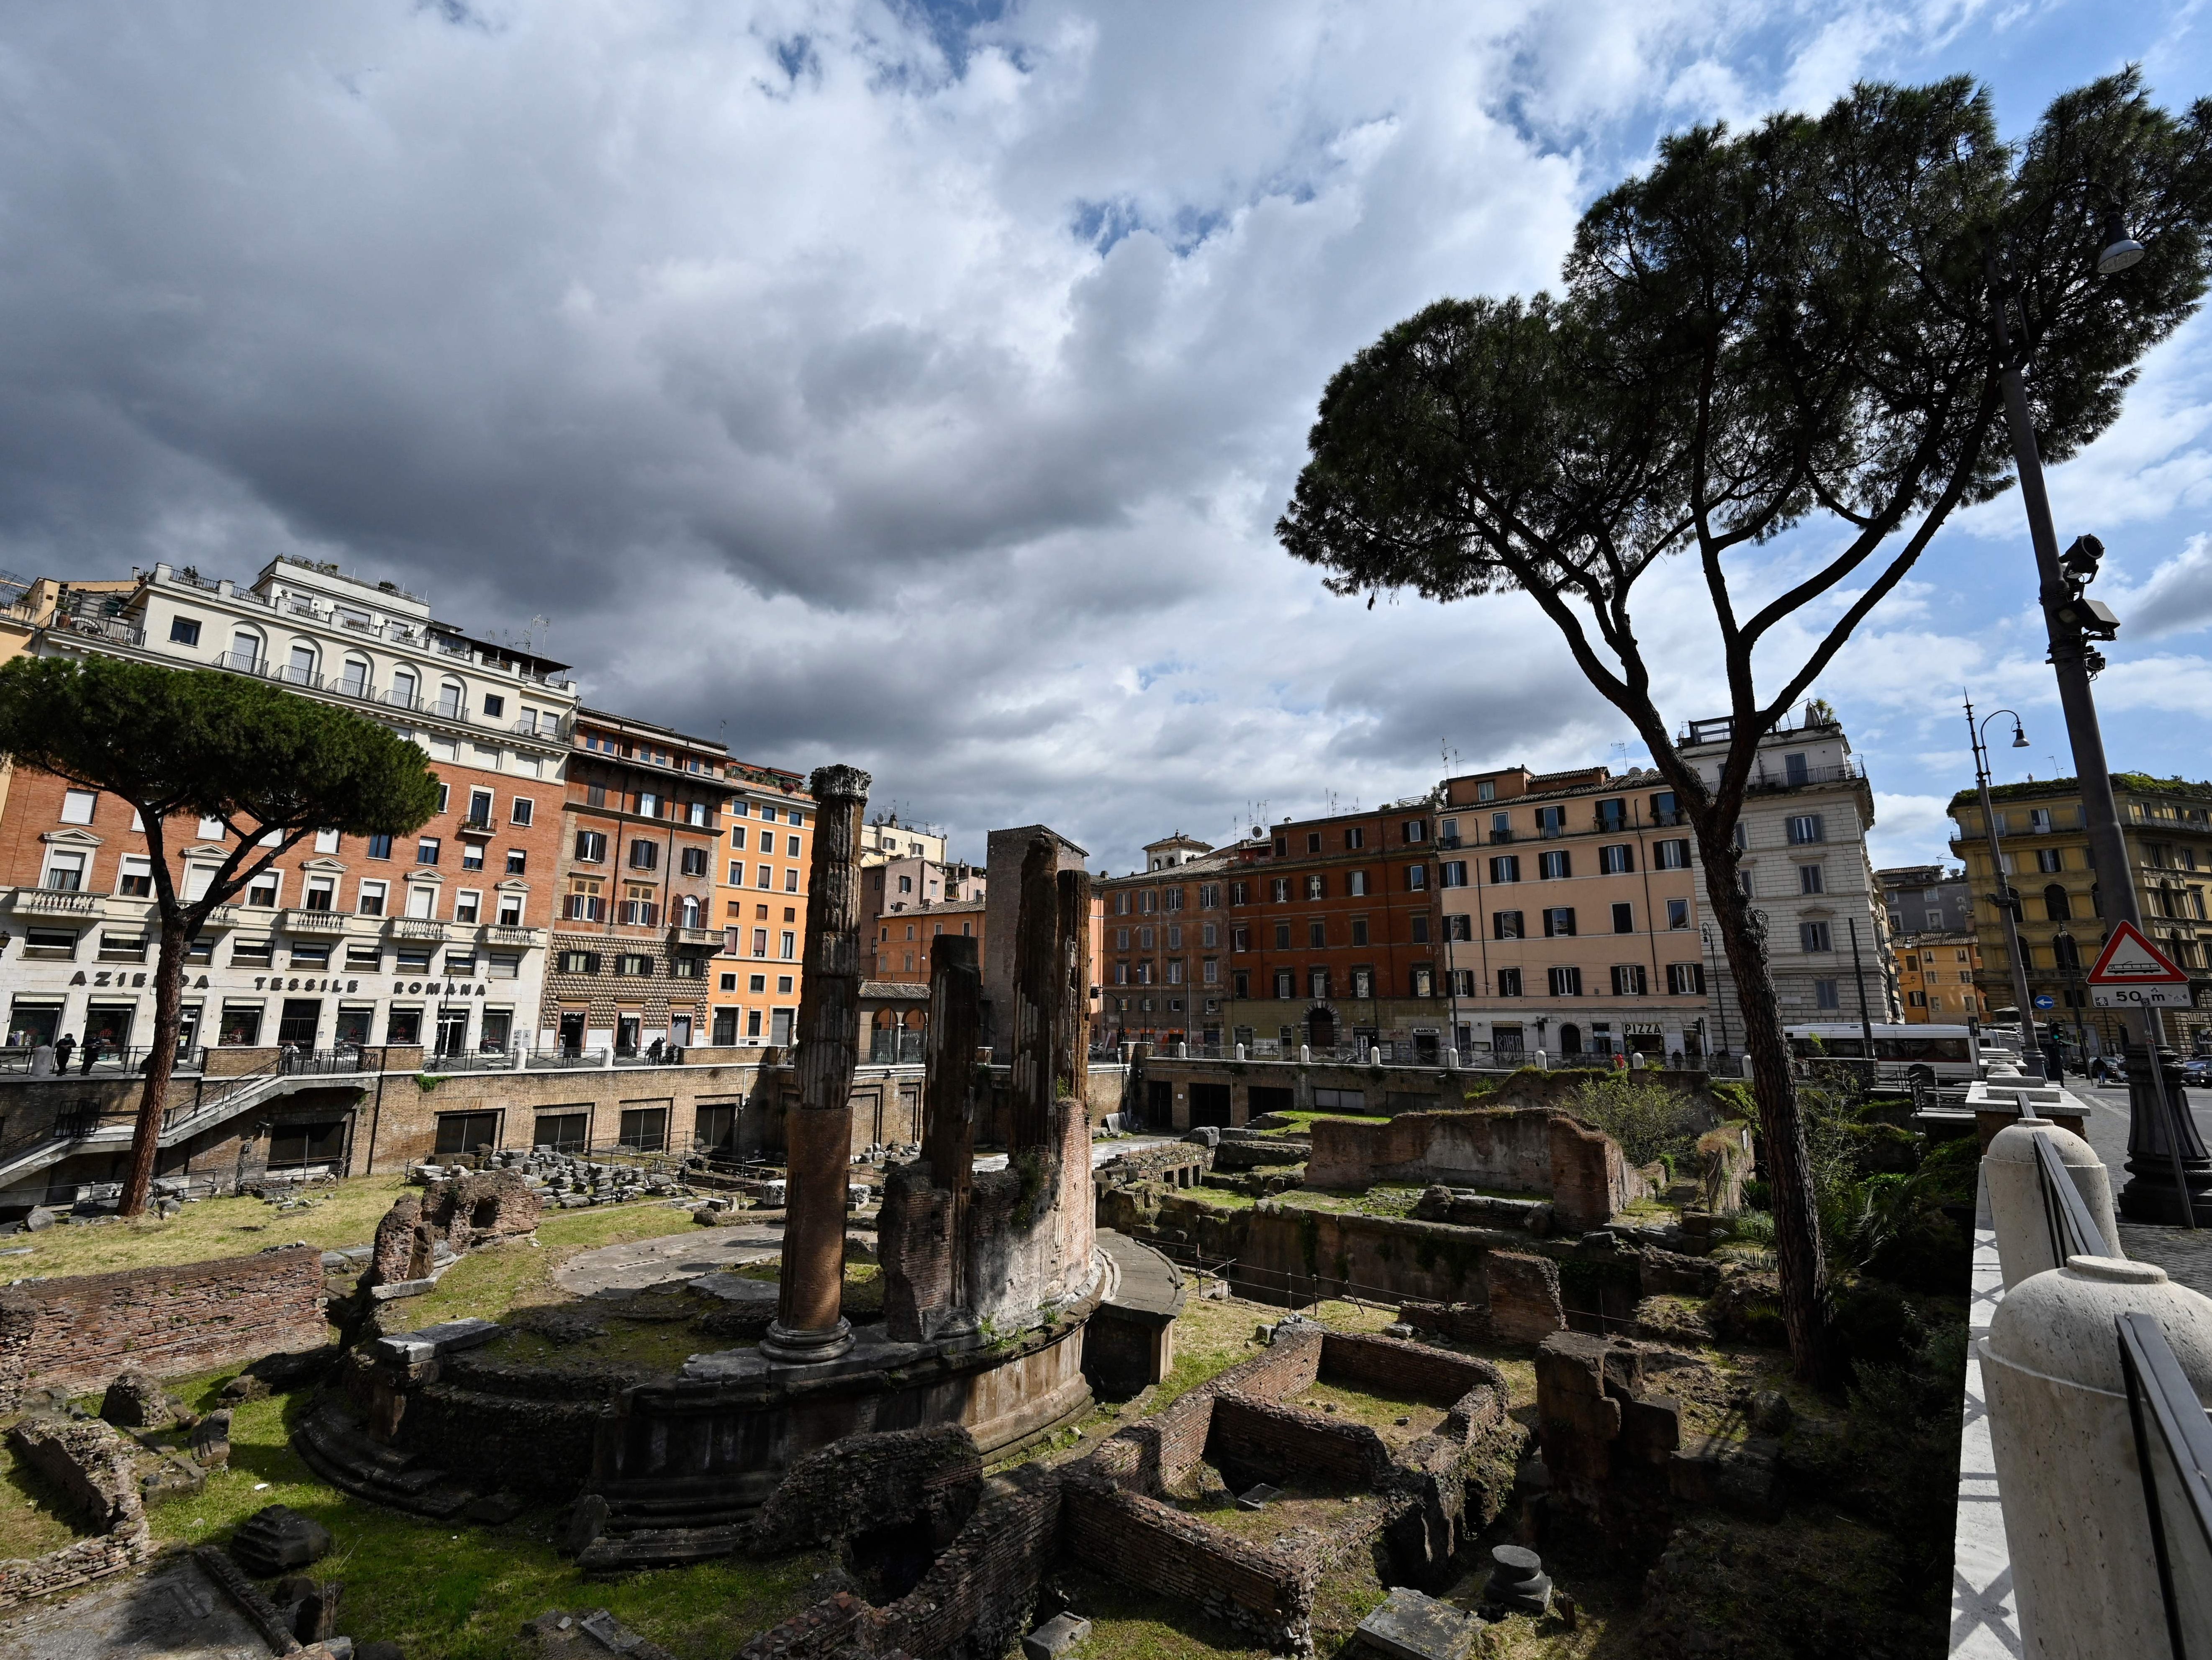 A view shows the Largo Argentina archaeological site on 14 April 2021 in central Rome